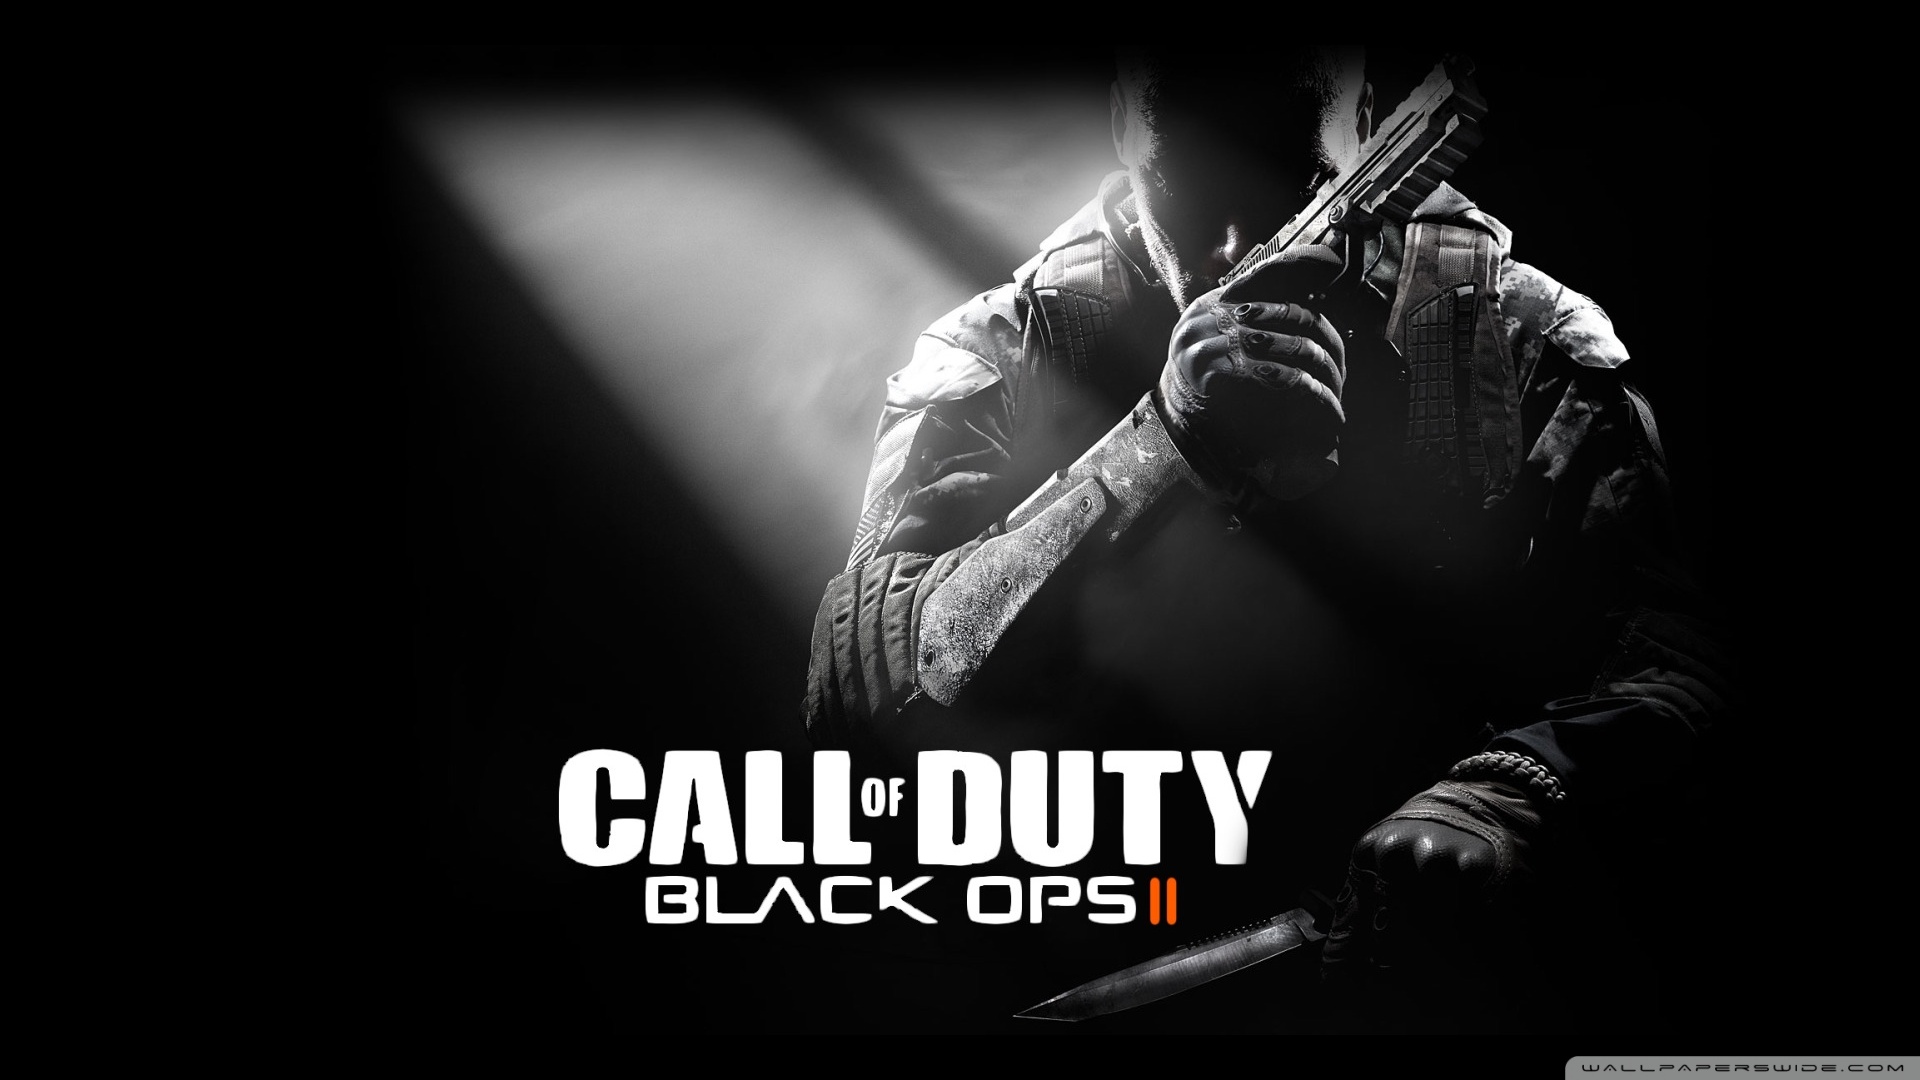 Black Ops 2 Wallpaper for Download 1920x1080